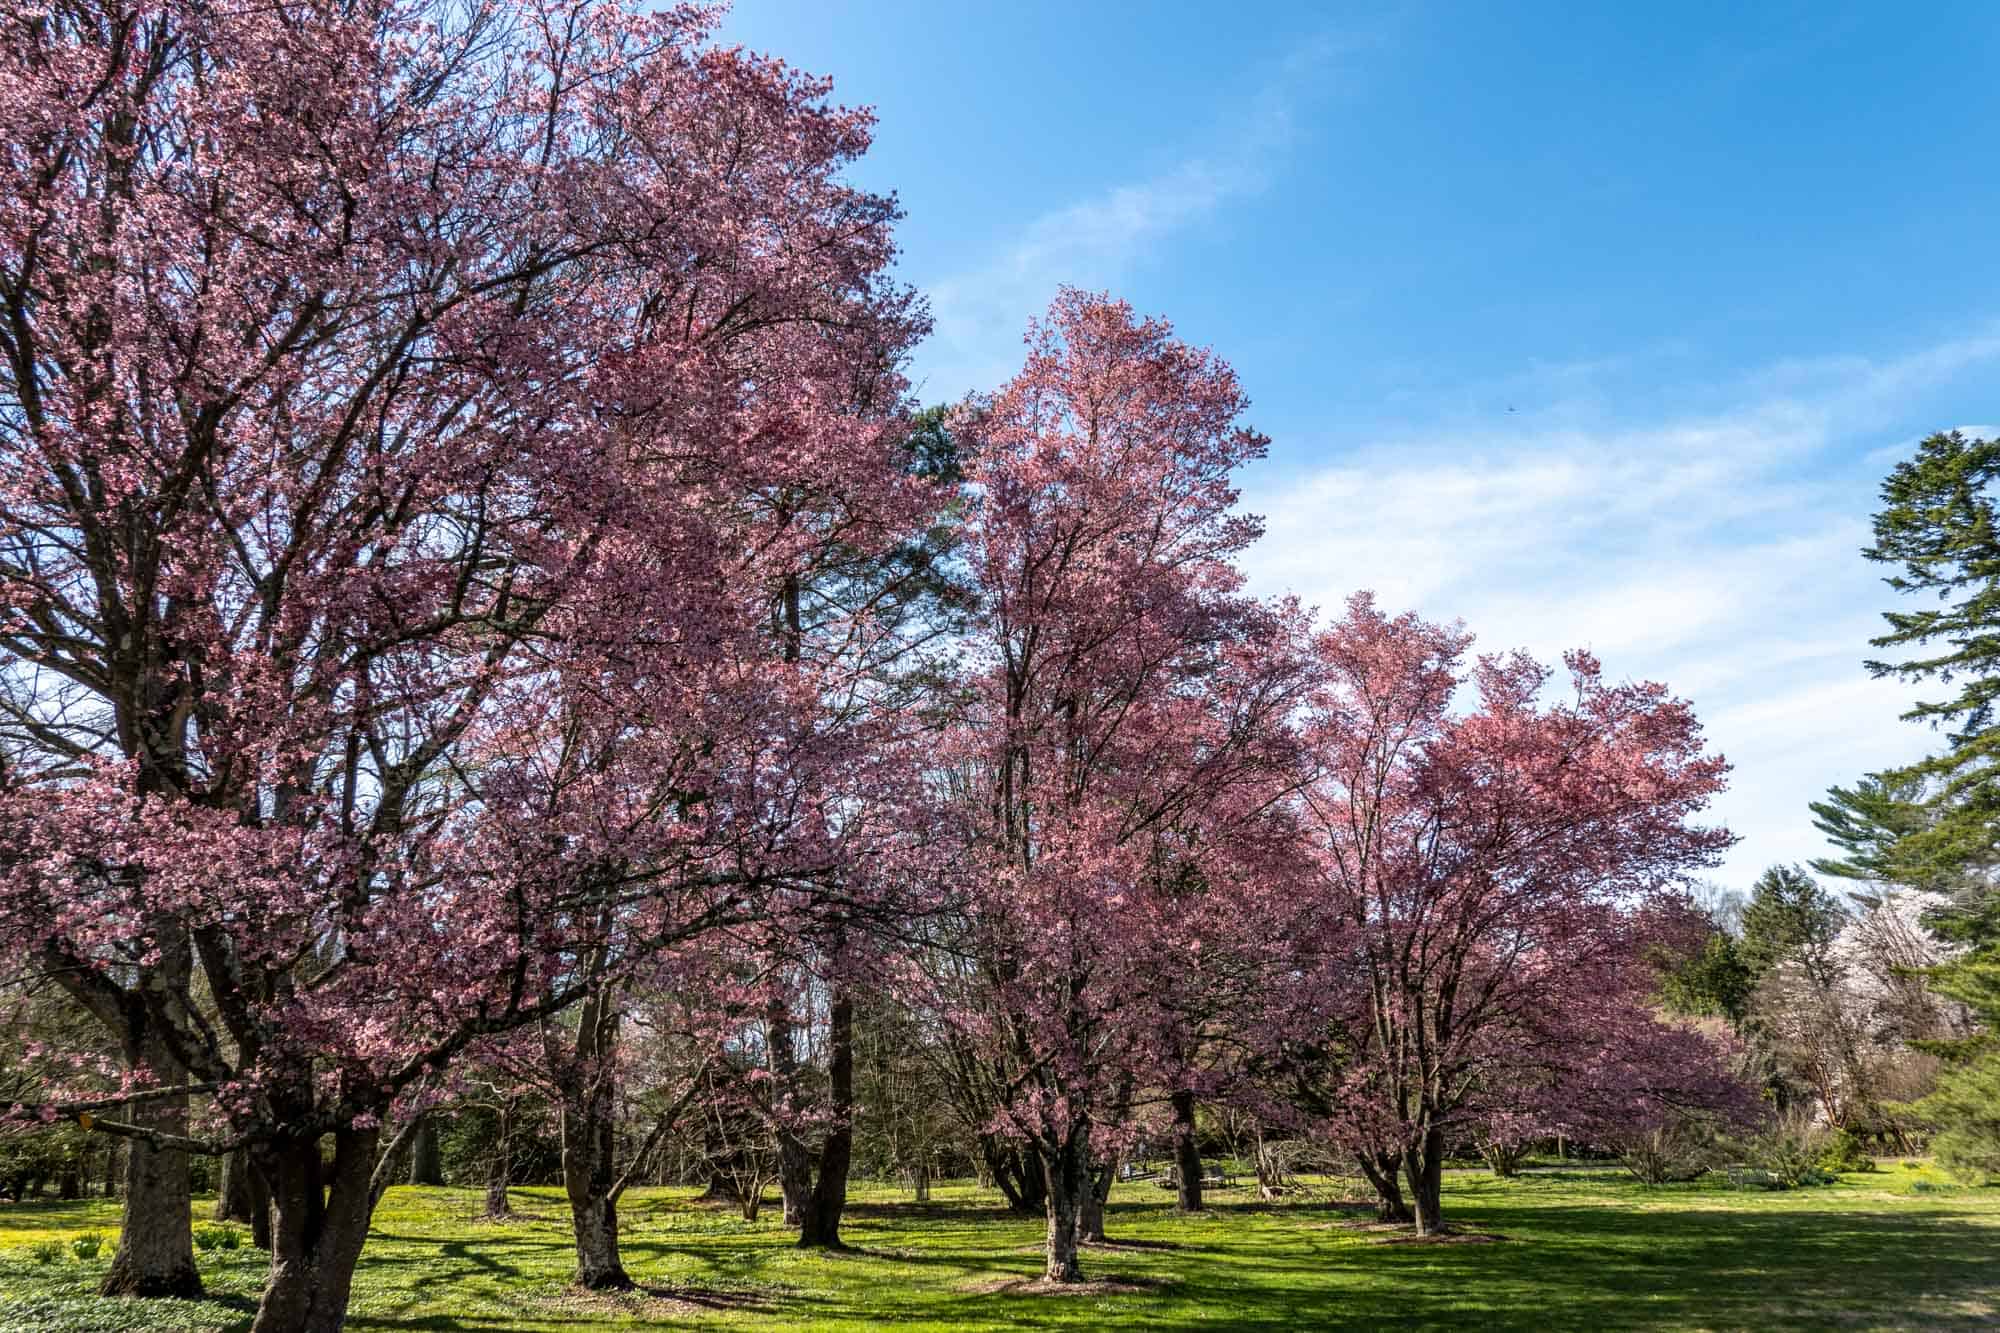 Trees with bright pink blossoms